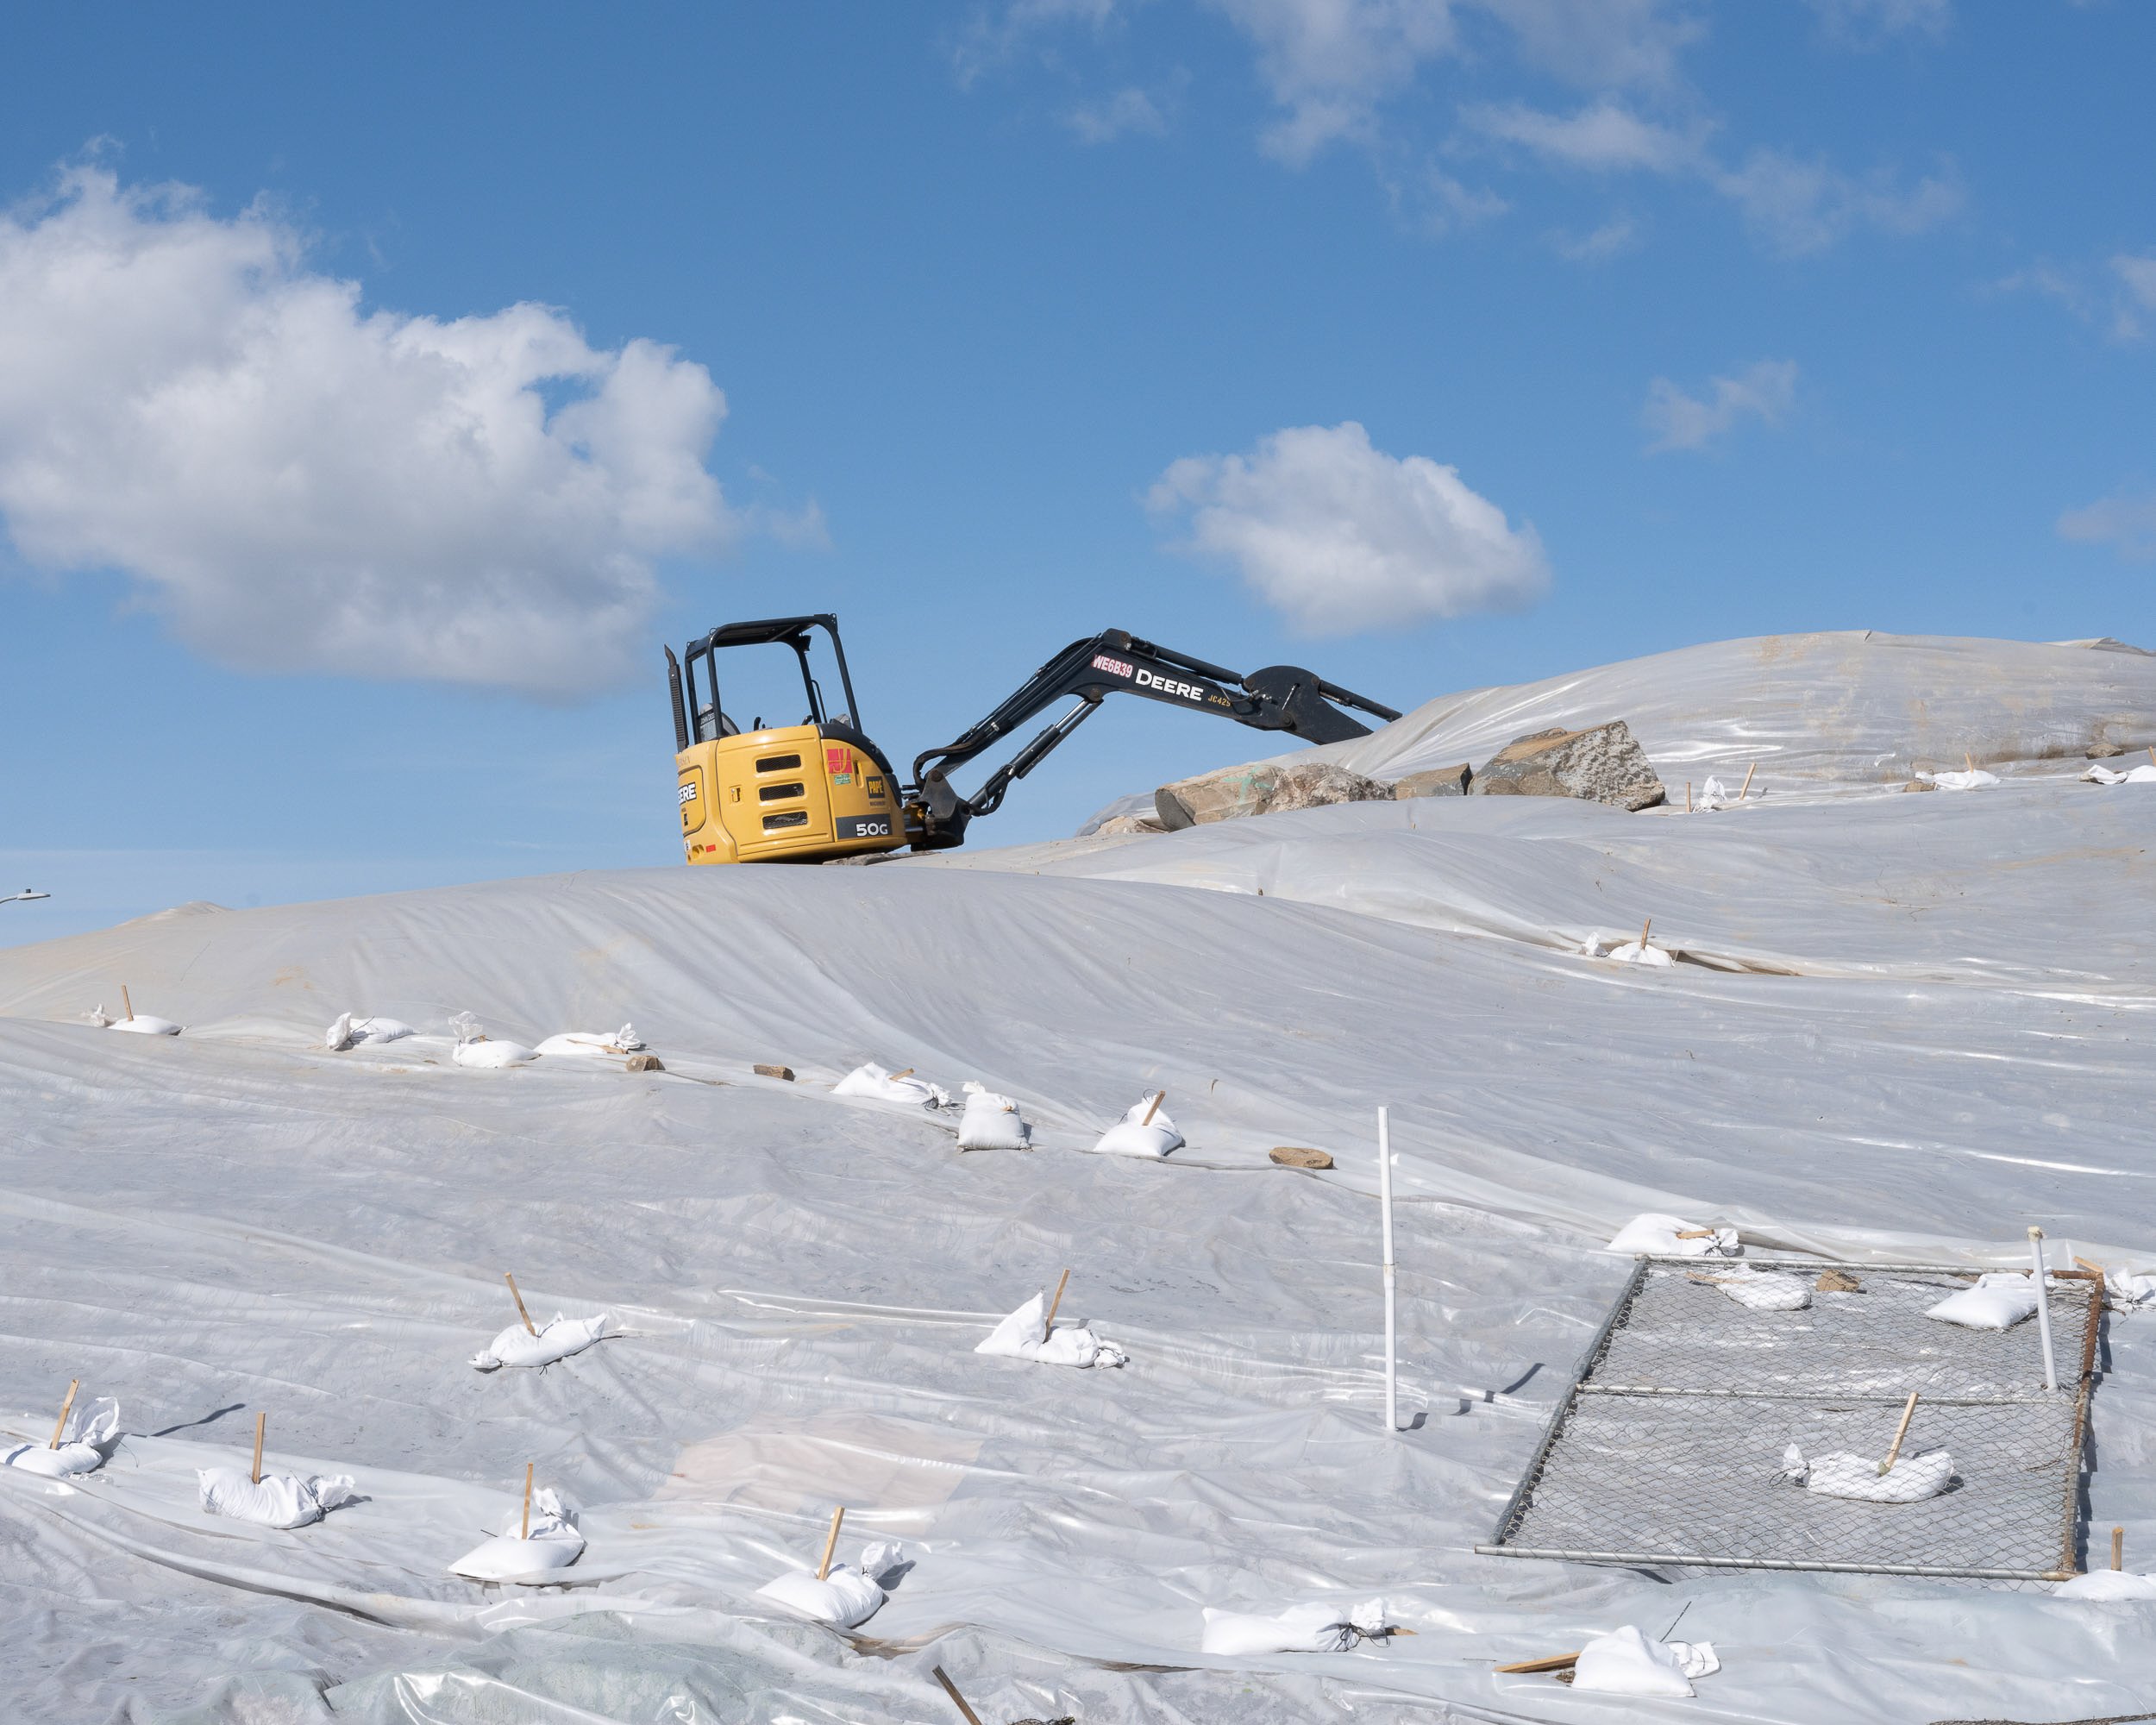   Construction Equipment on Hill Covered in Plastic, 2023  